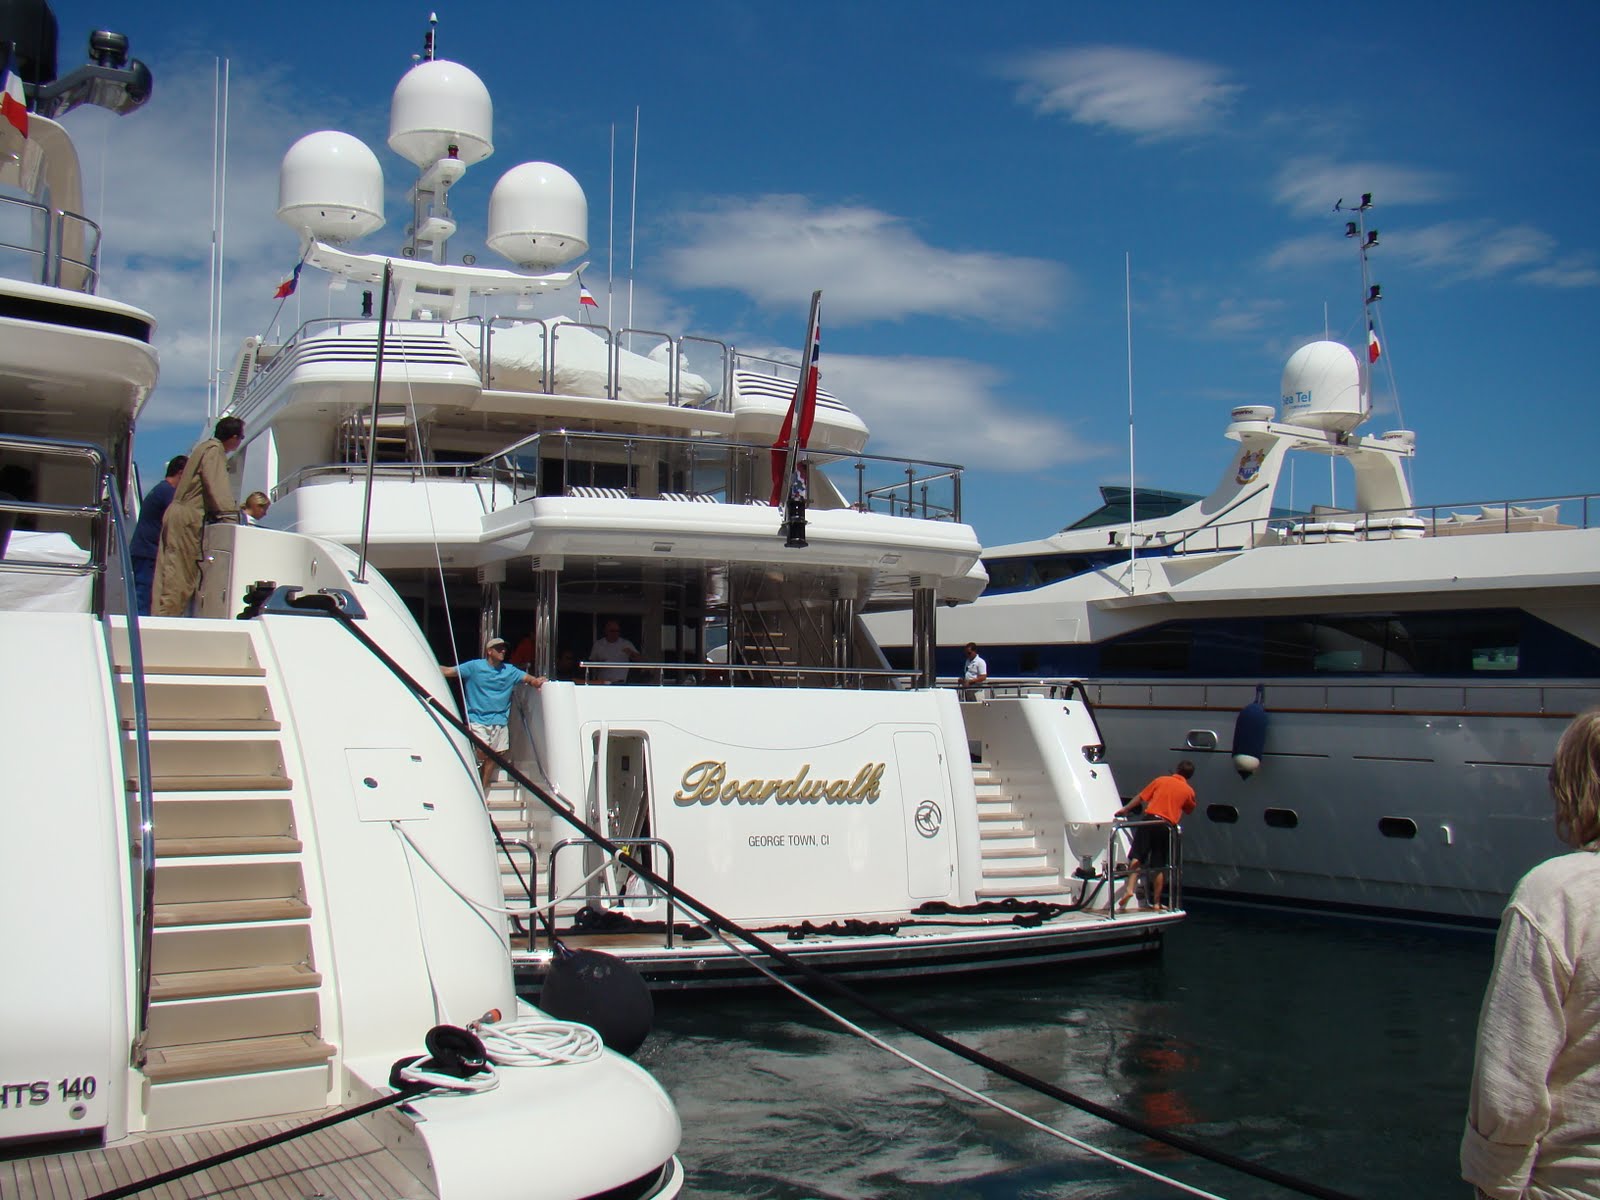 who owns a yacht named boardwalk